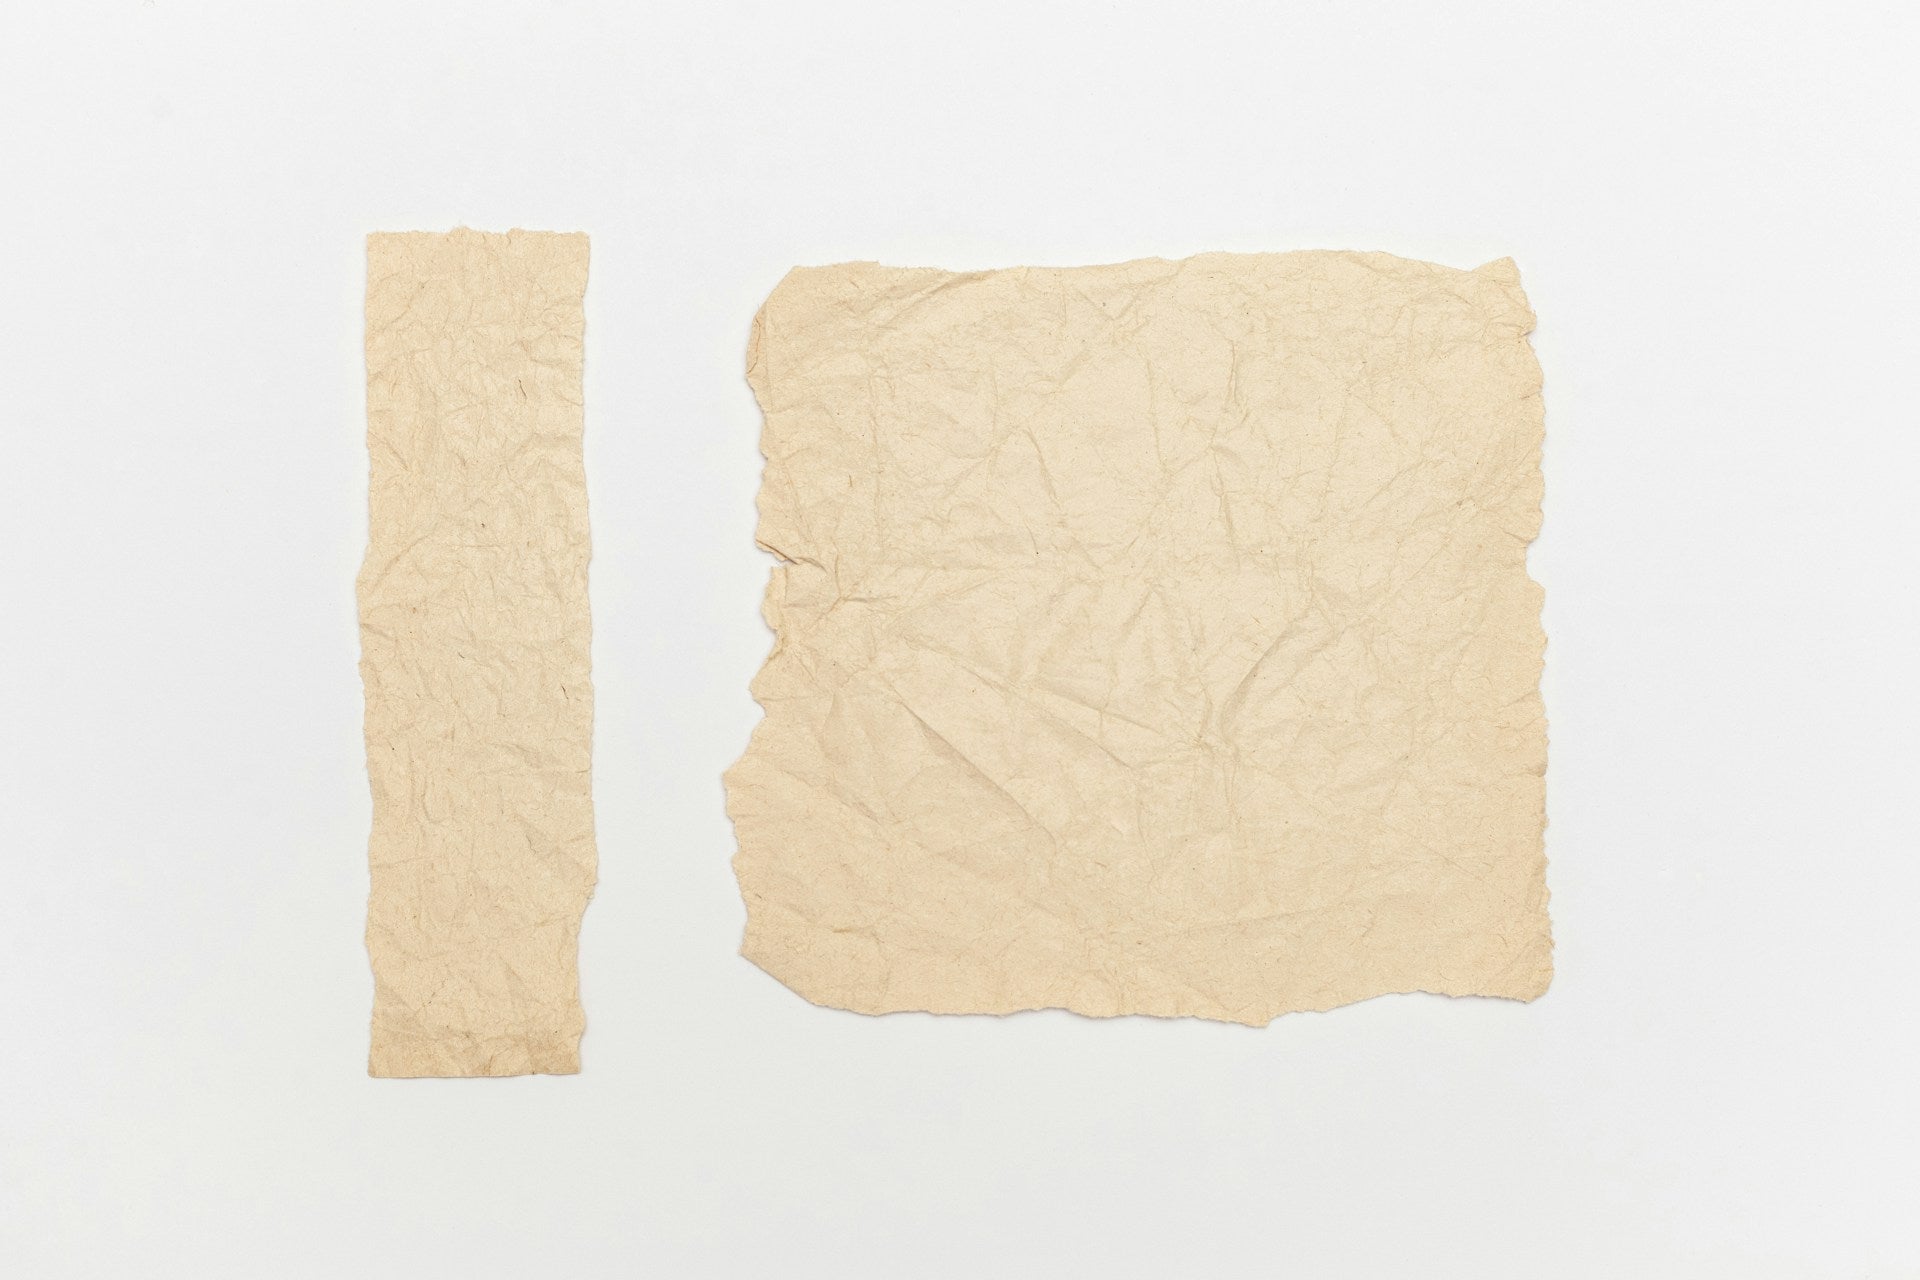 Two pieces of crumpled paper on a white surface.